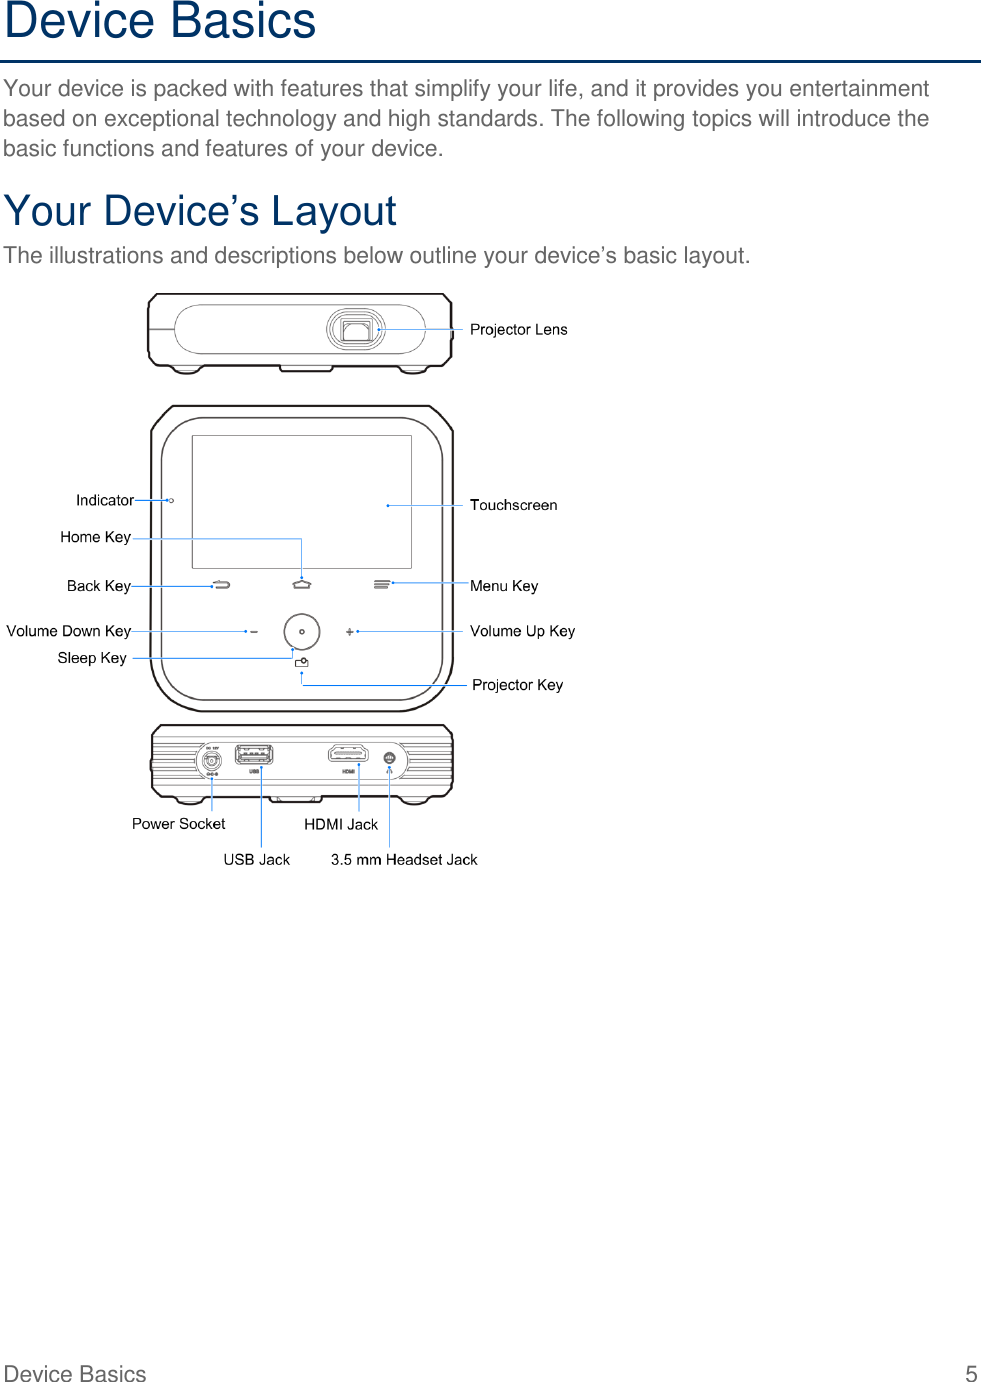  Device Basics  5 Device Basics Your device is packed with features that simplify your life, and it provides you entertainment based on exceptional technology and high standards. The following topics will introduce the basic functions and features of your device. Your Device’s Layout The illustrations and descriptions below outline your device’s basic layout.  